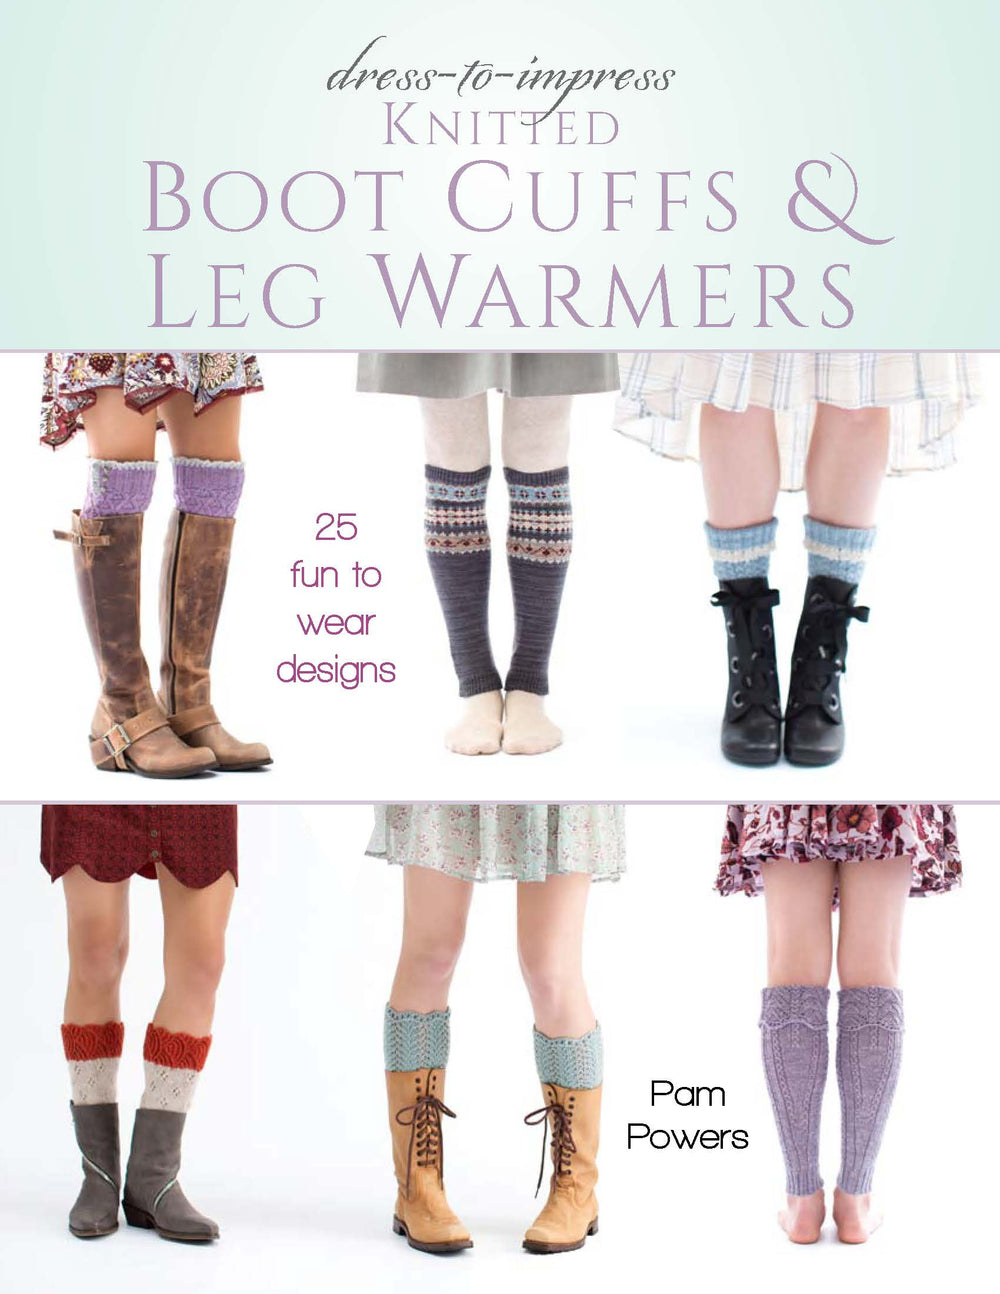 New Book Release! D-T-I Knitted Boot Cuffs & Leg Warmers – Pam